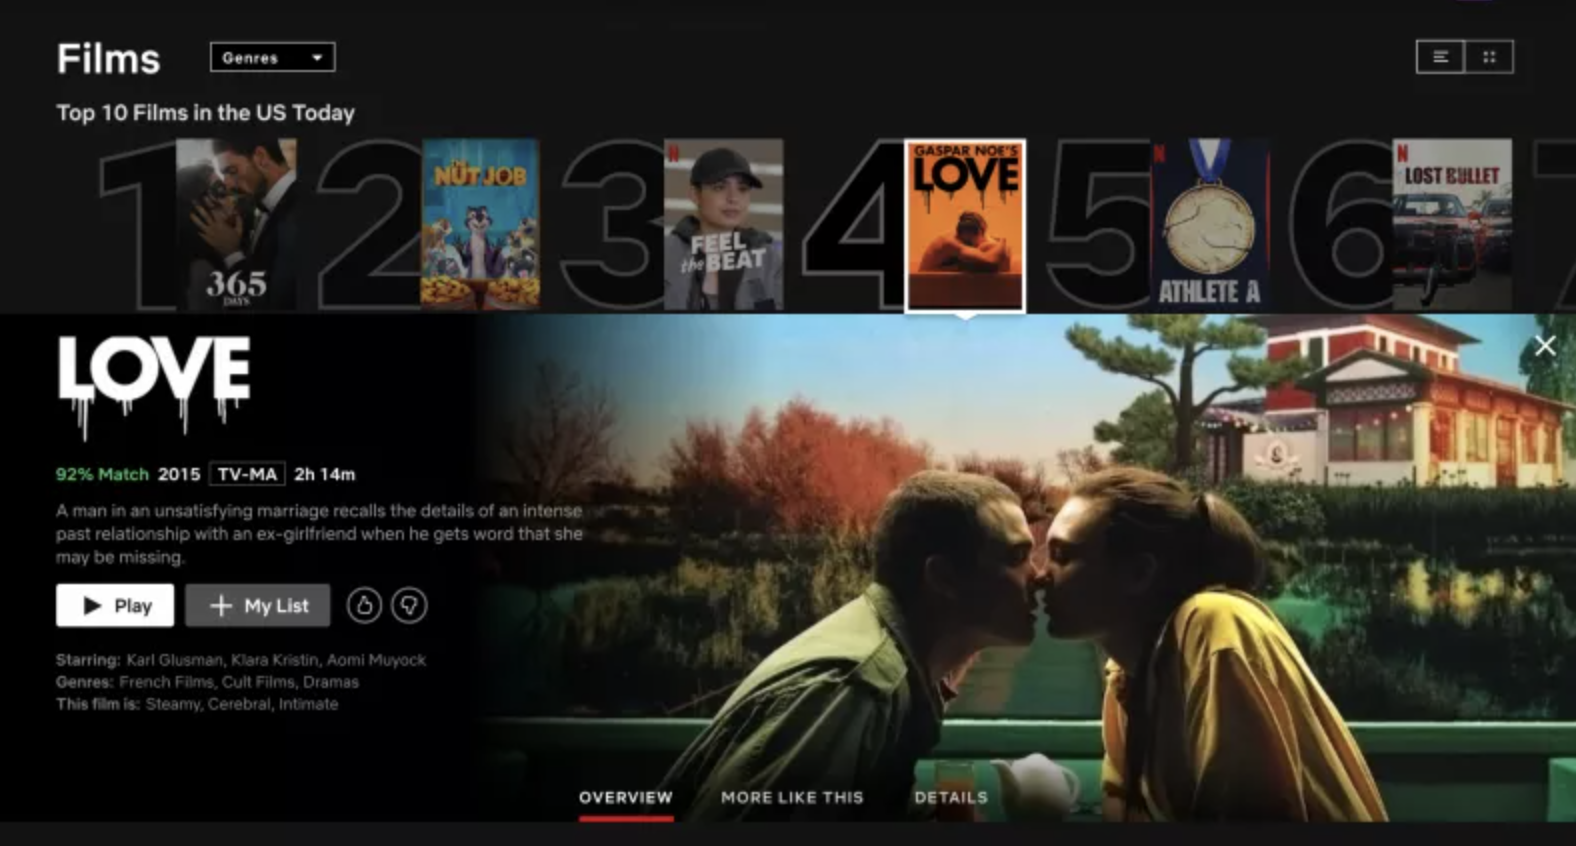 The Netflix page for the movie Love